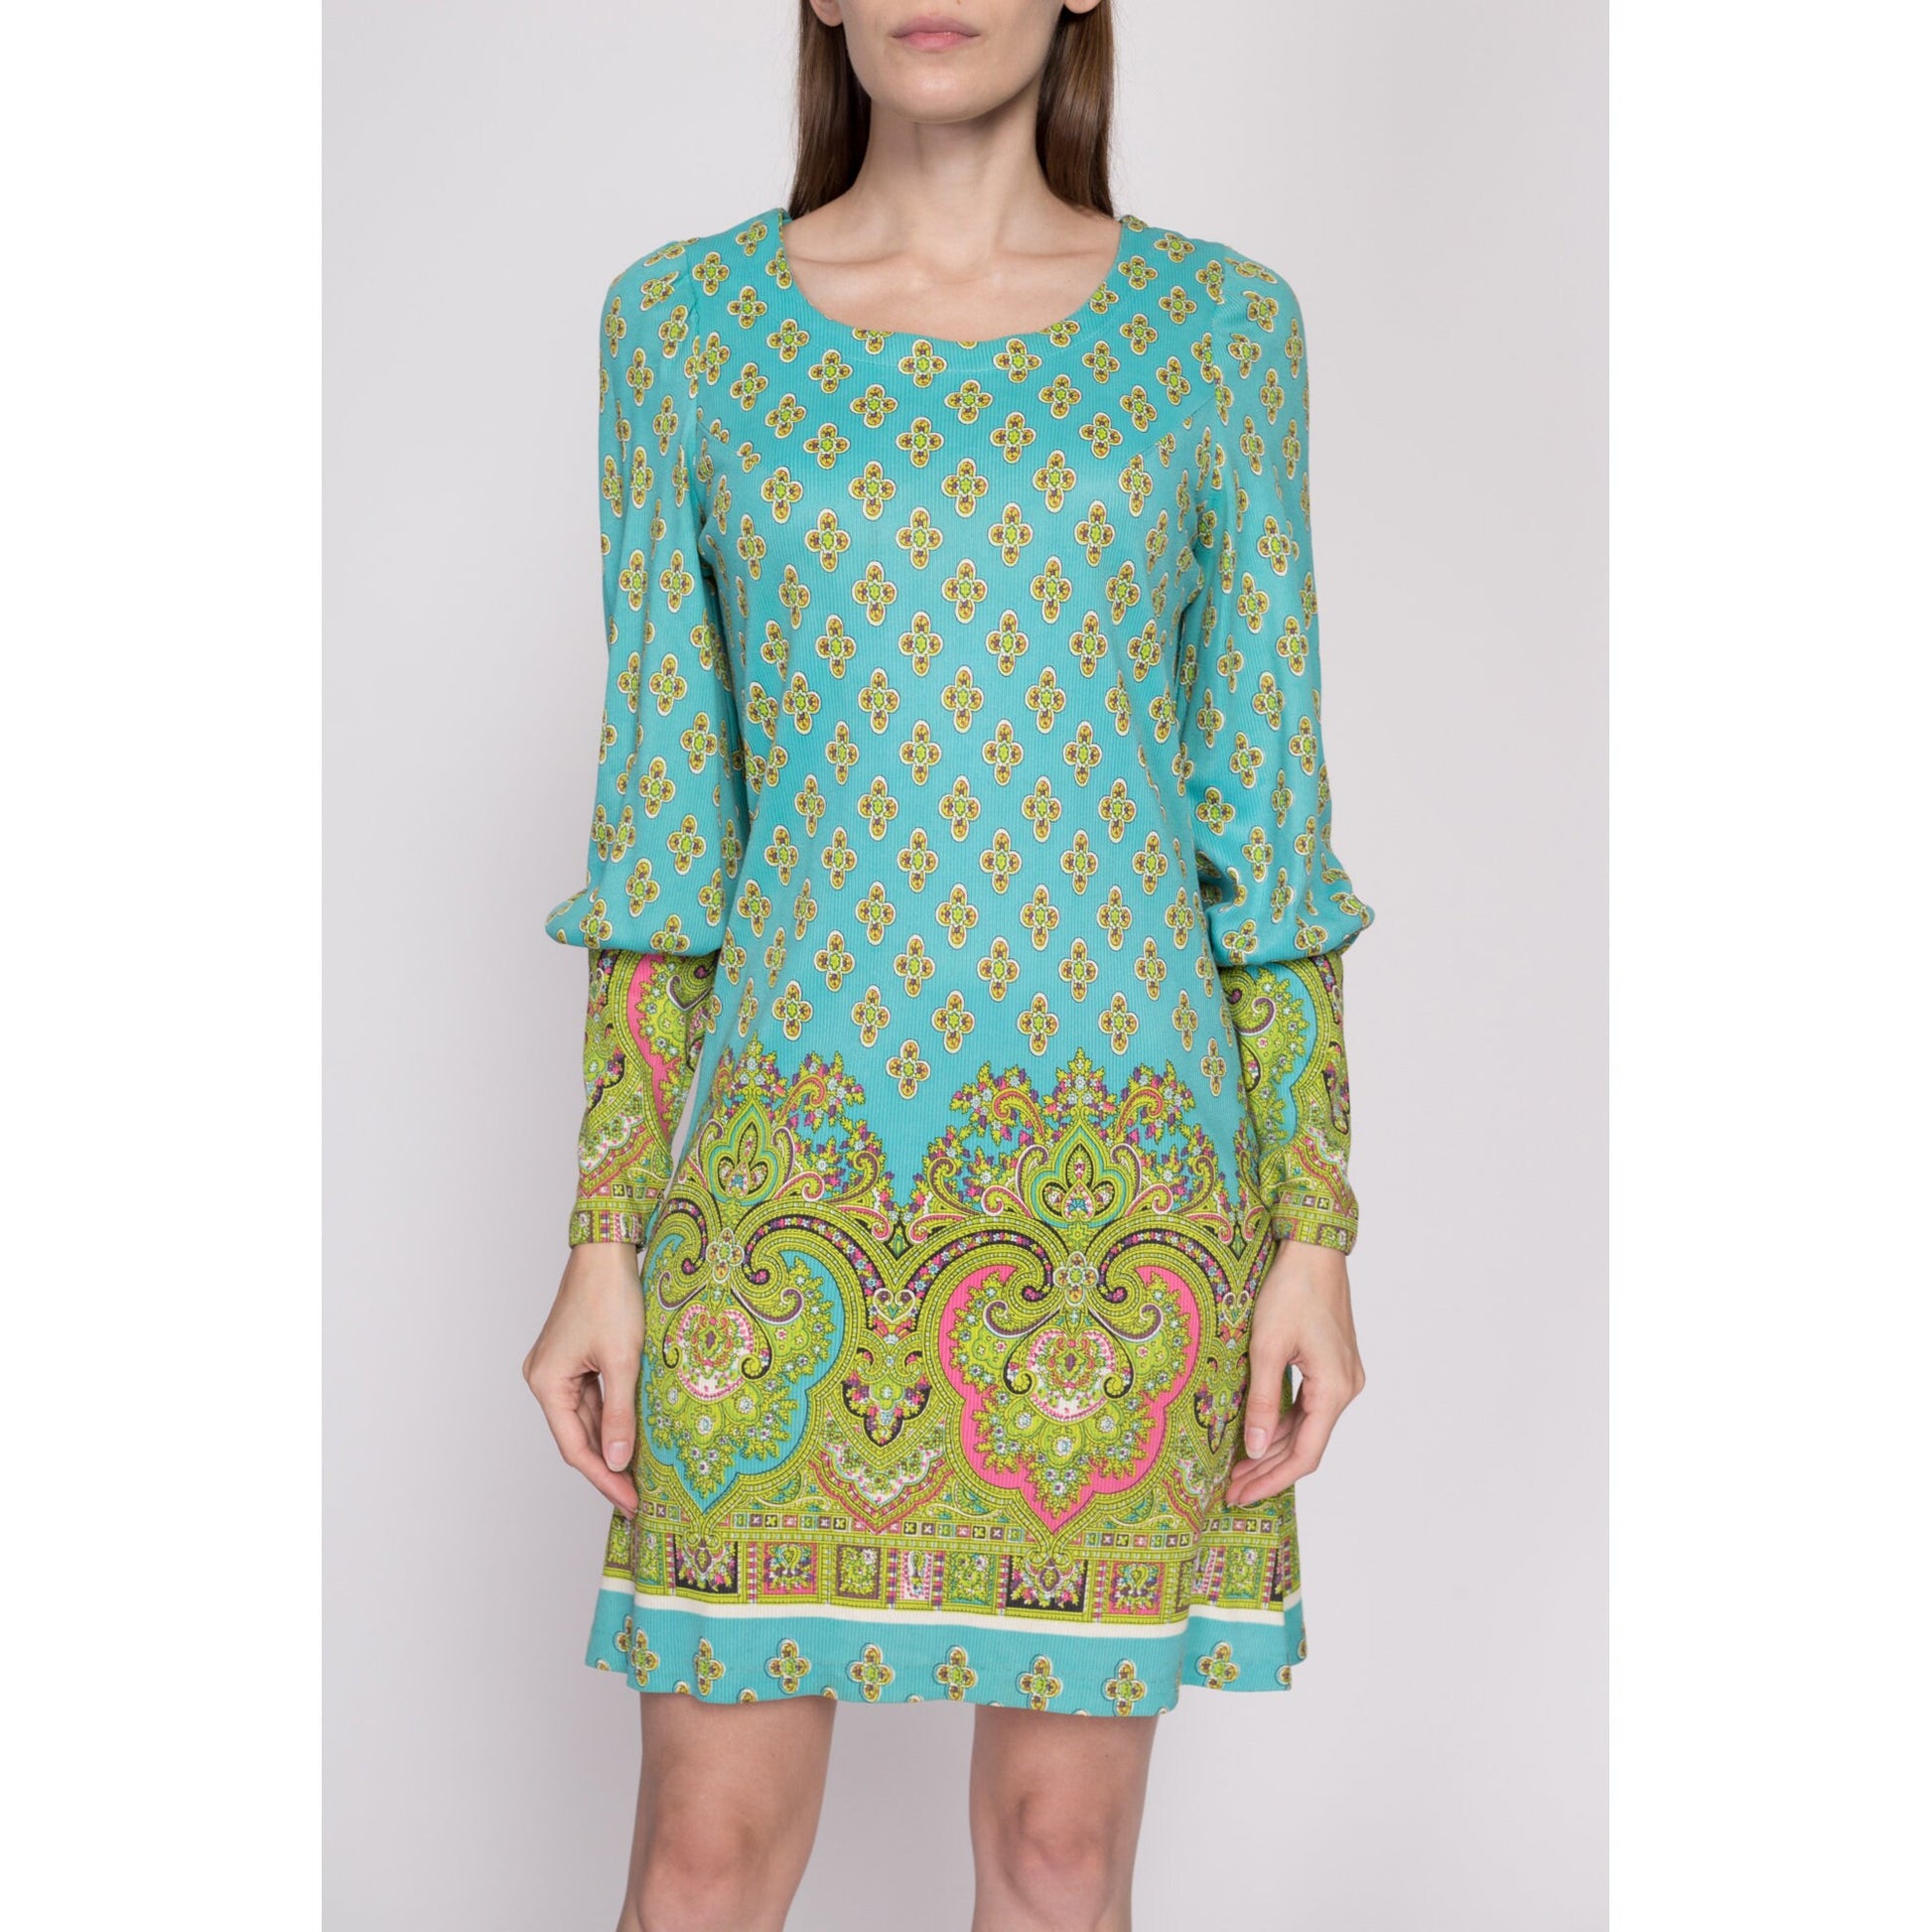 XS-S| 60s Psychedelic Paisley Print Mini Dress - XS to Small | Vintage Blue Green Long Sleeve A Line Shift Mod Minidress